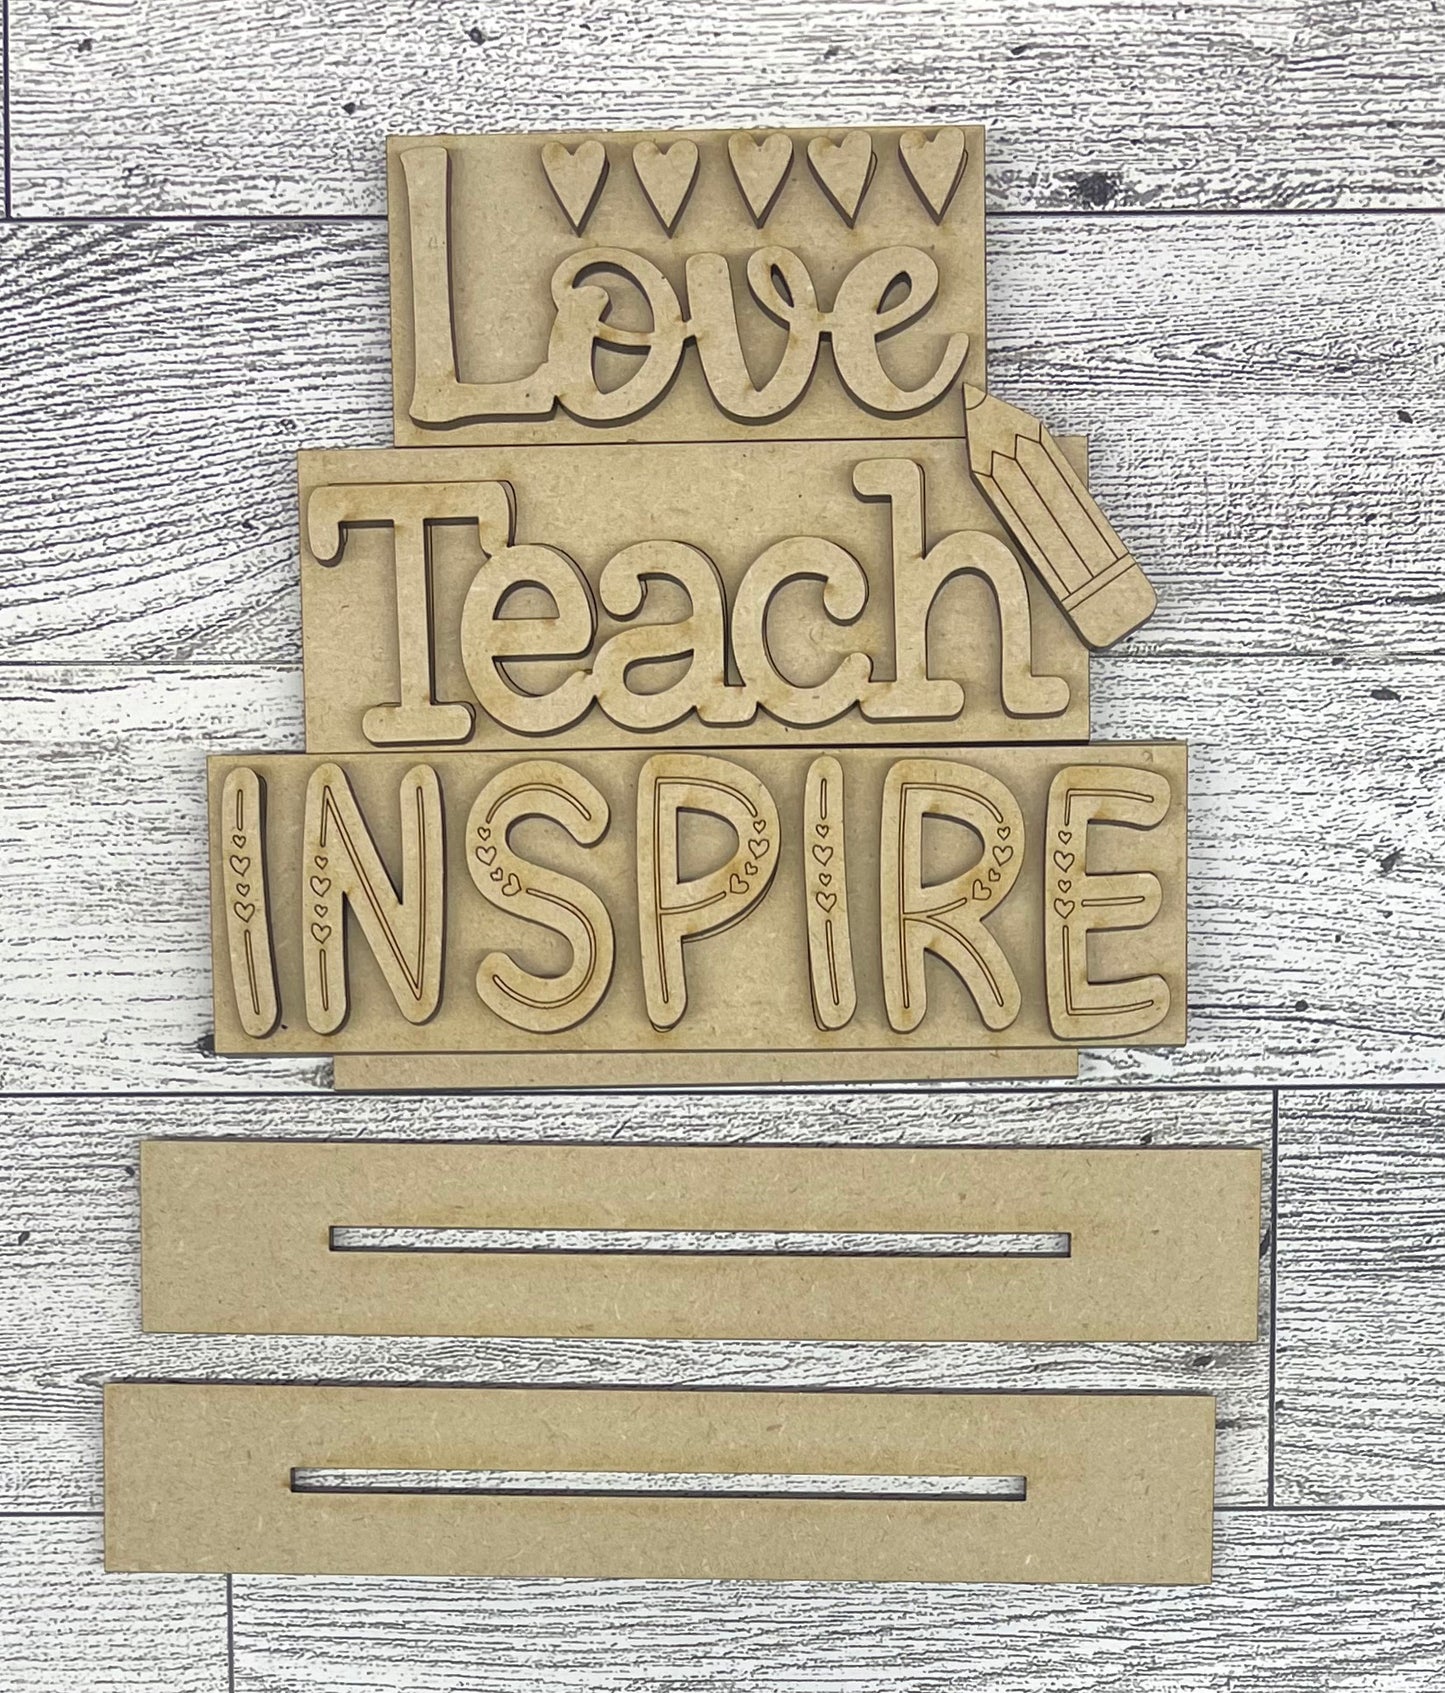 Teacher word stacker kits - wood pieces, unpainted wood cutouts, ready for you to paint, scrapbook paper is not included  lol